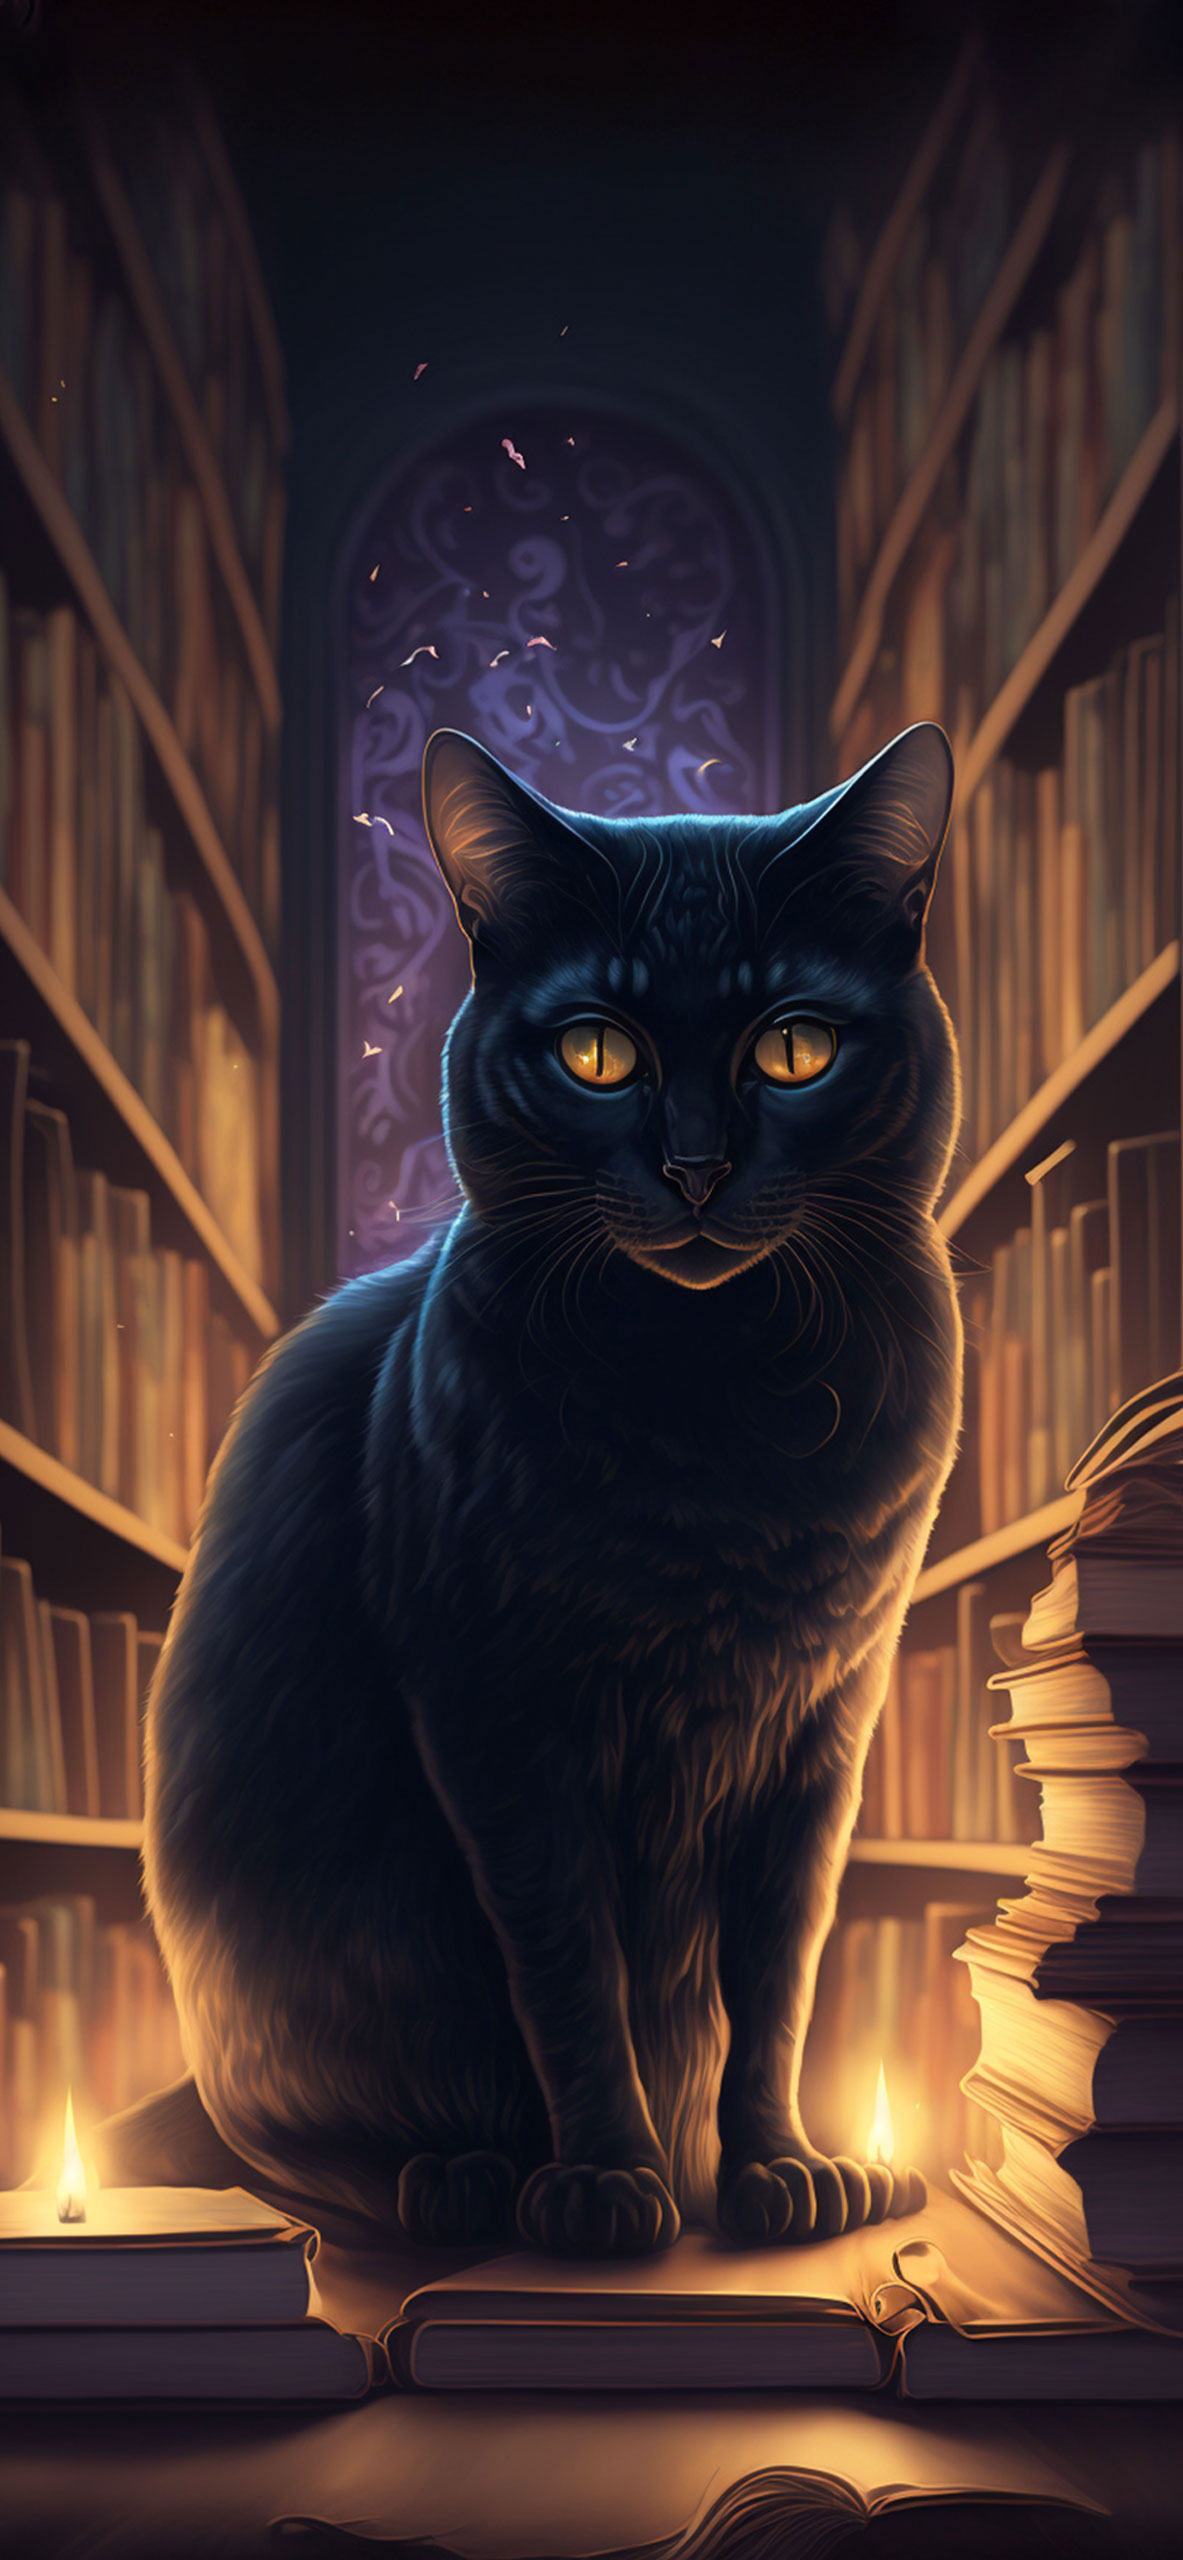 Black Cat In Library Wallpaper For iPhone